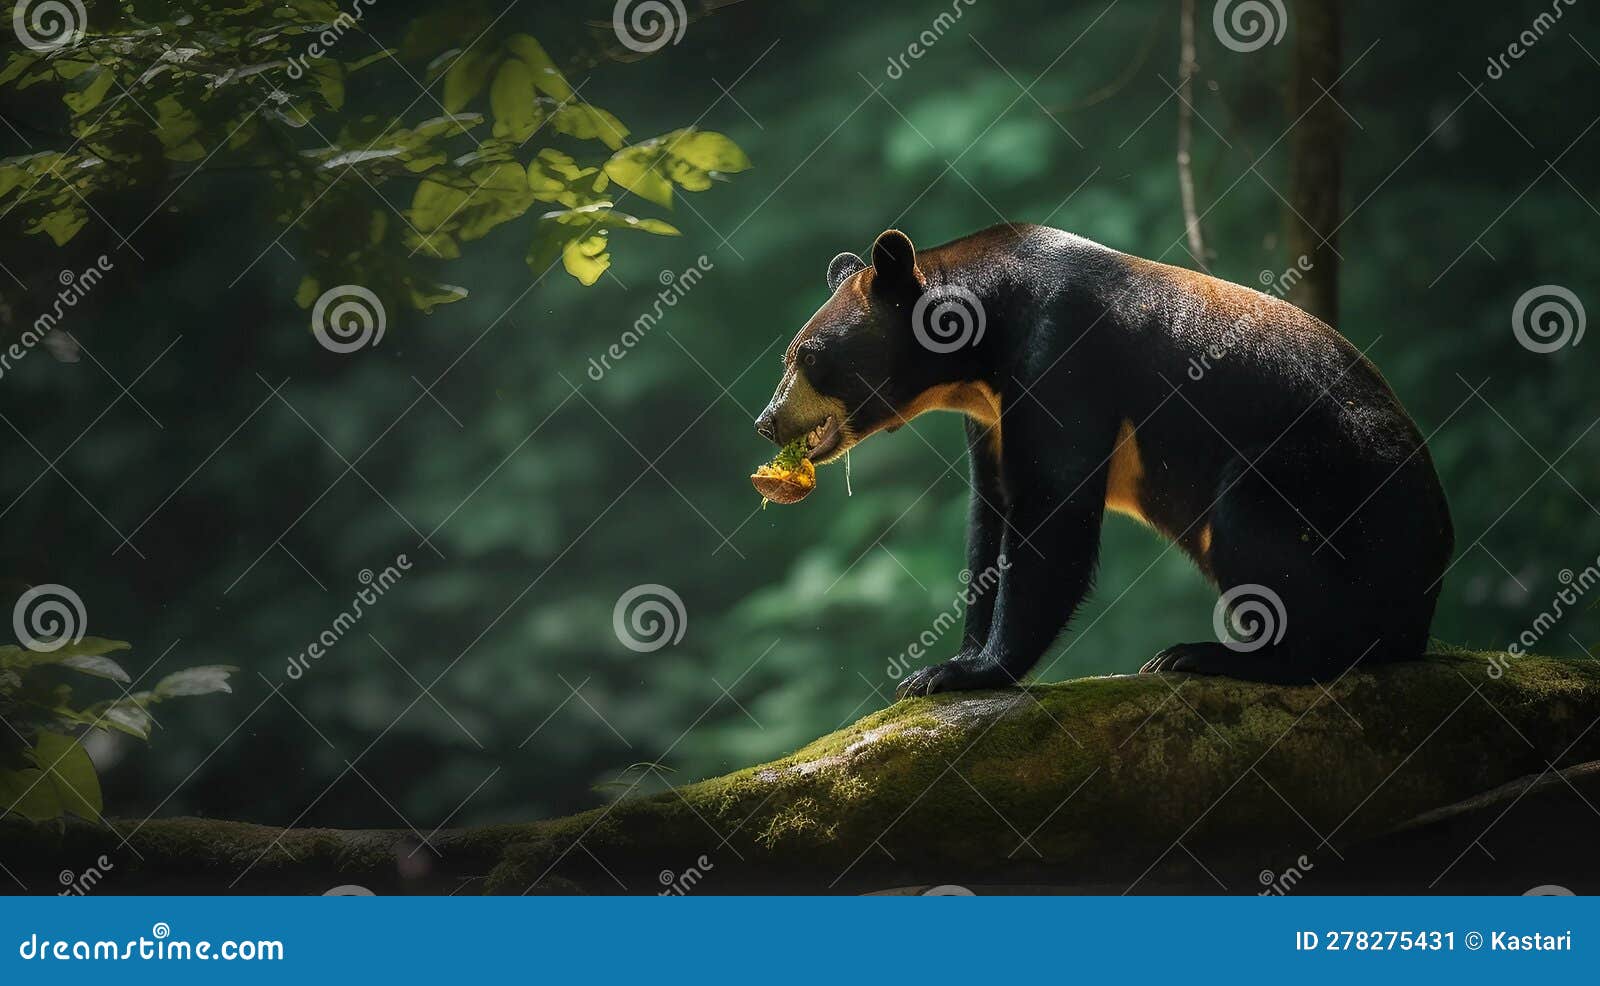 sun bear in a lonely forest